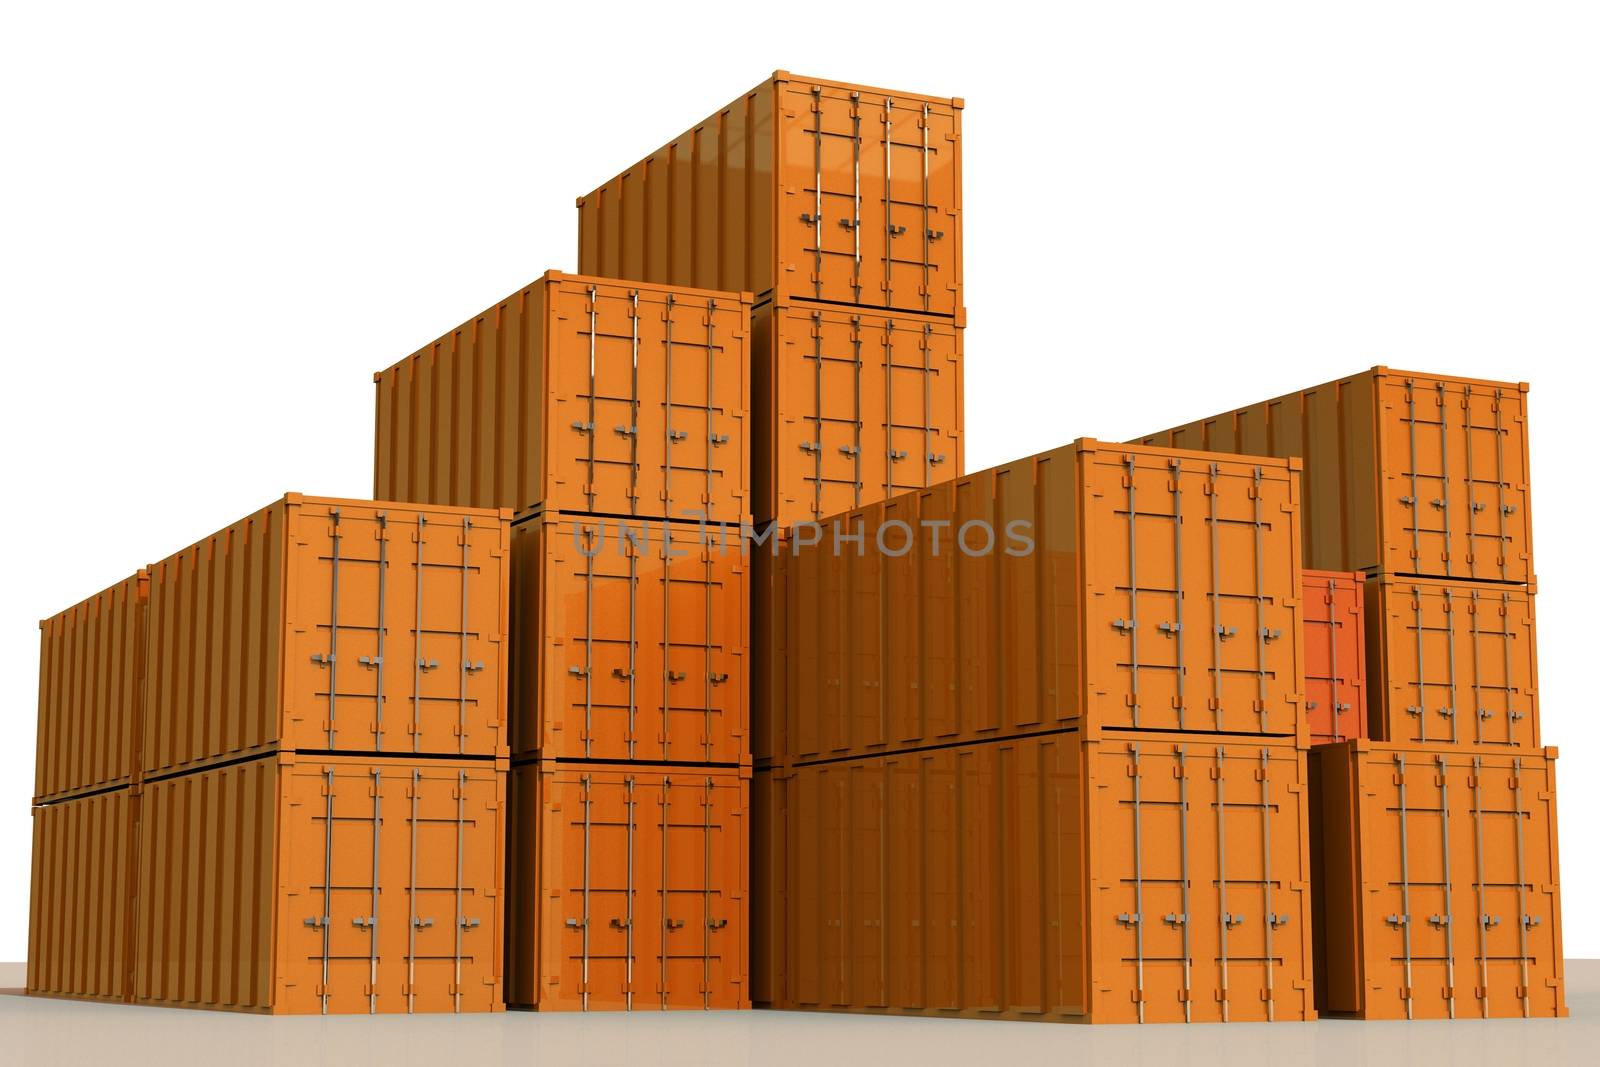 Cargo Shipping Containers by welcomia